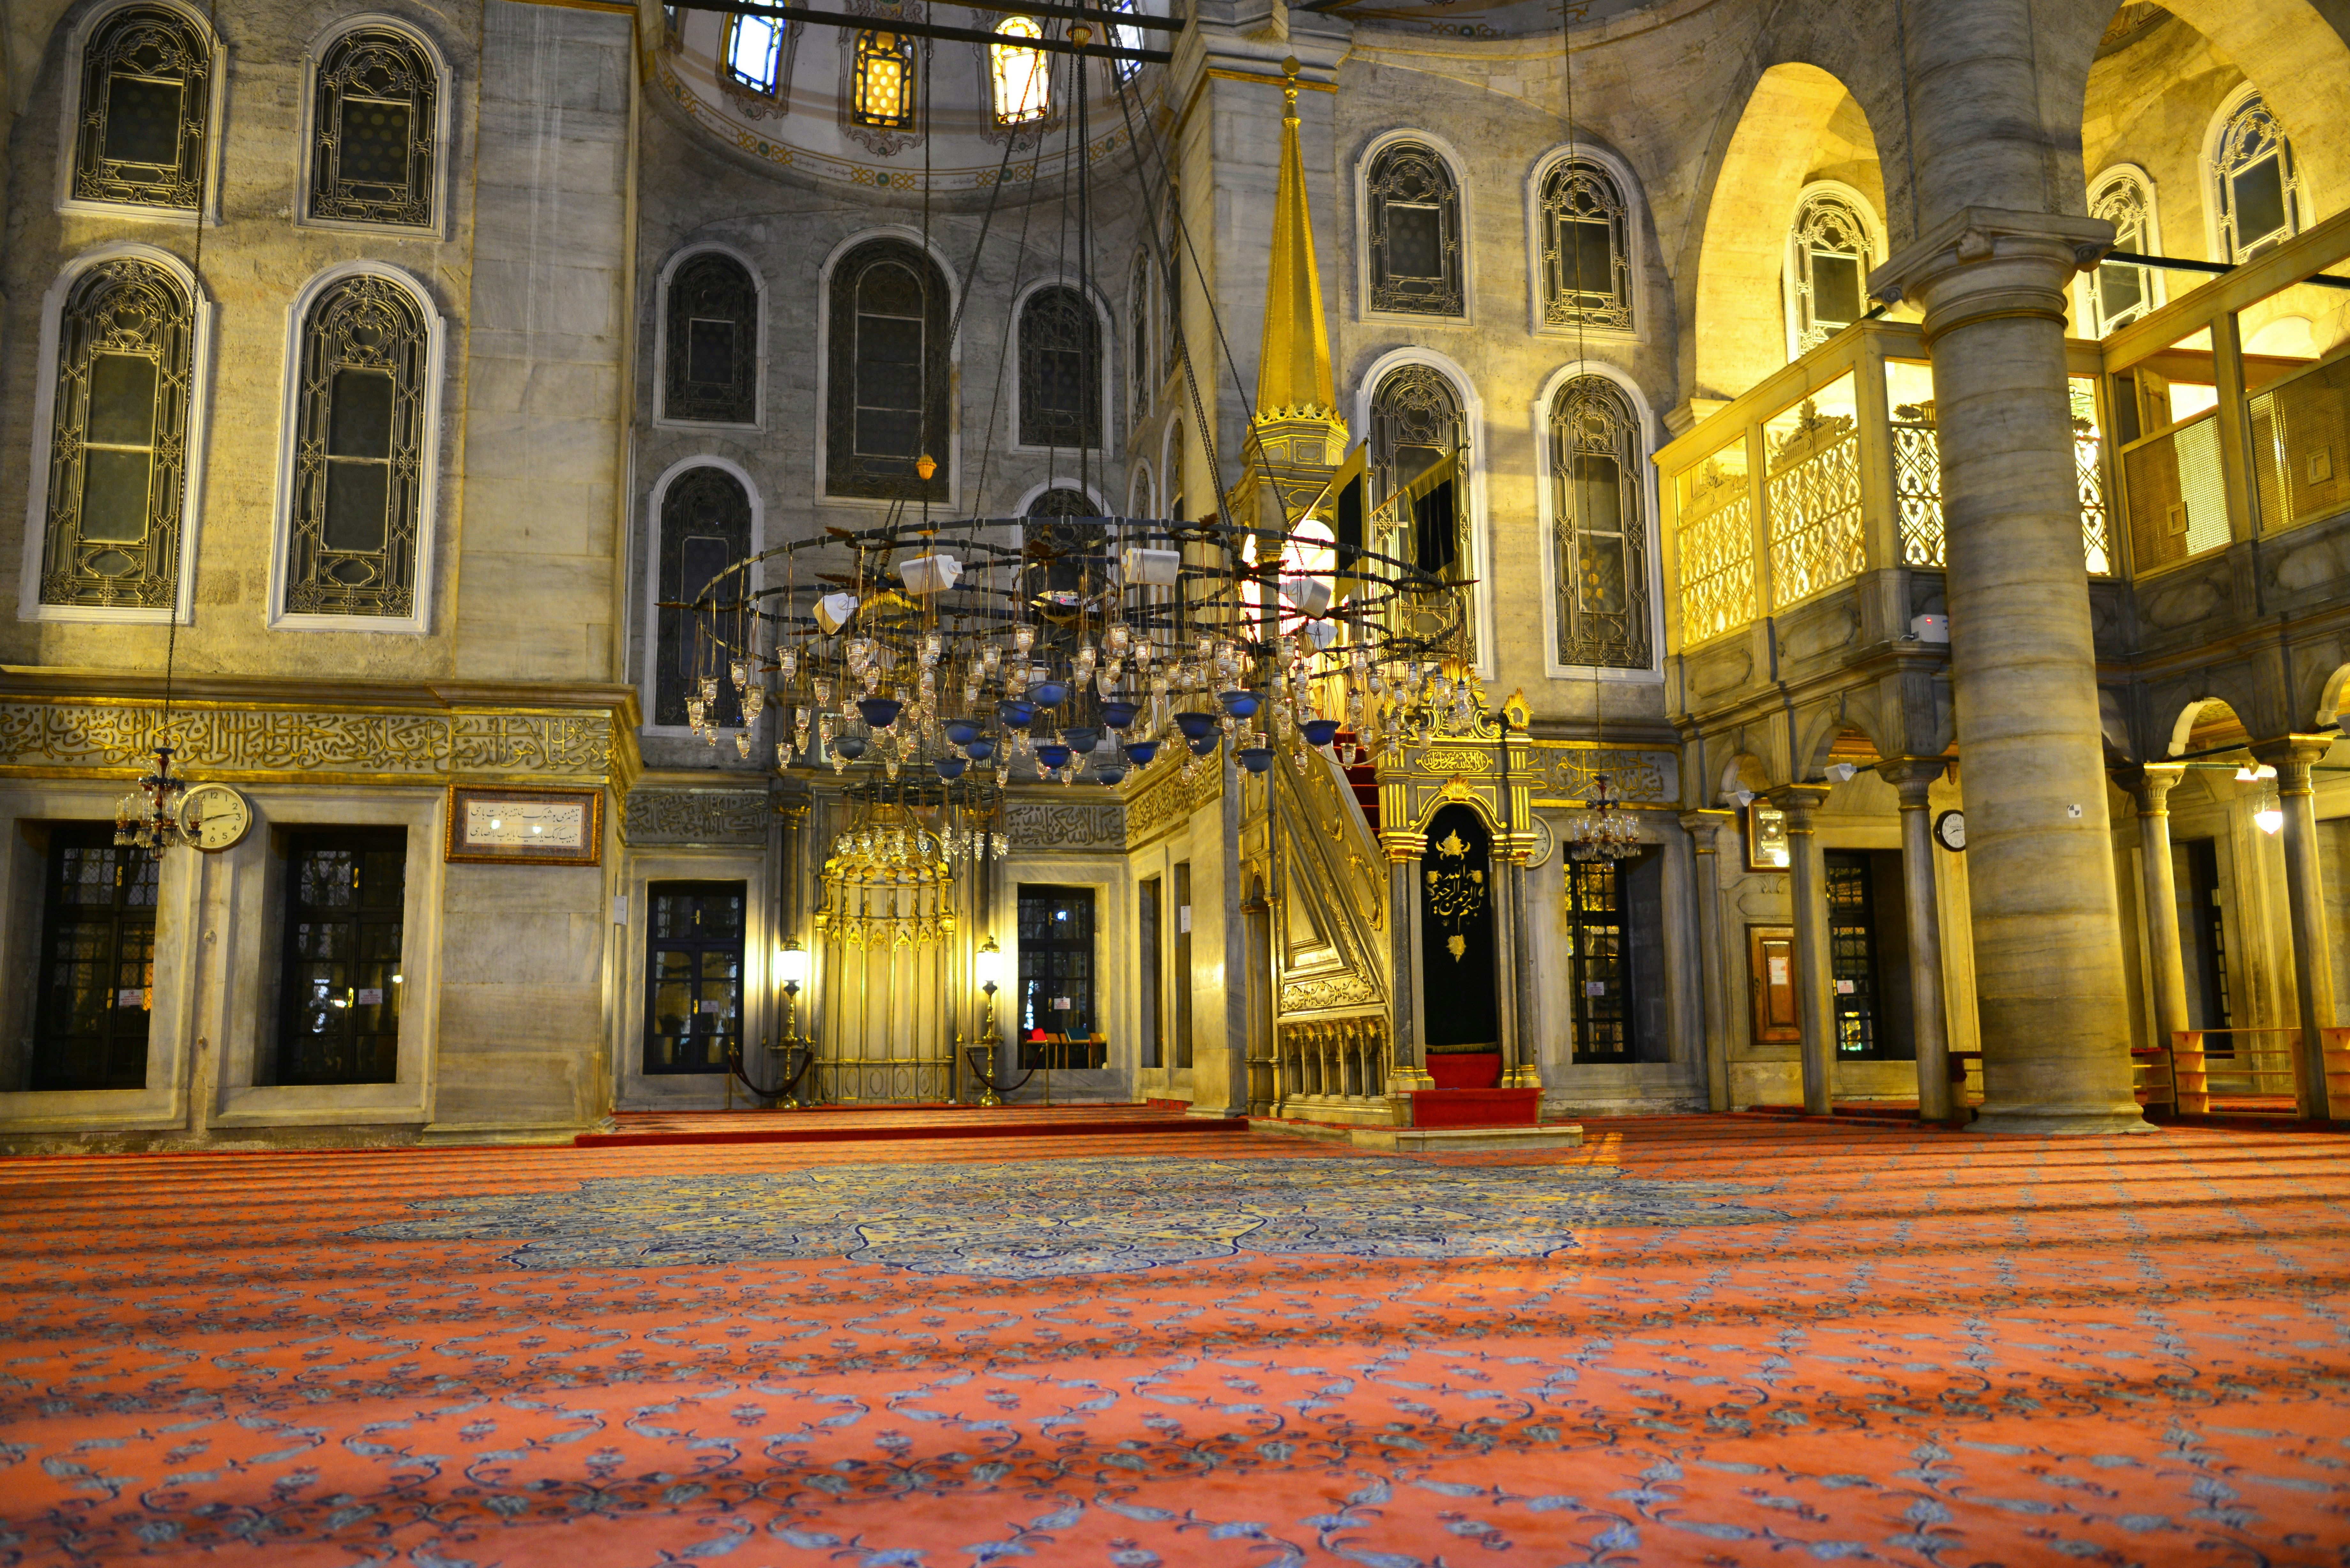 A large ornate chandelier hangs in the middle of the Eyüp Sultan Mosque. There's a large red and blue carpet spreading from one end of the mosque to the other.